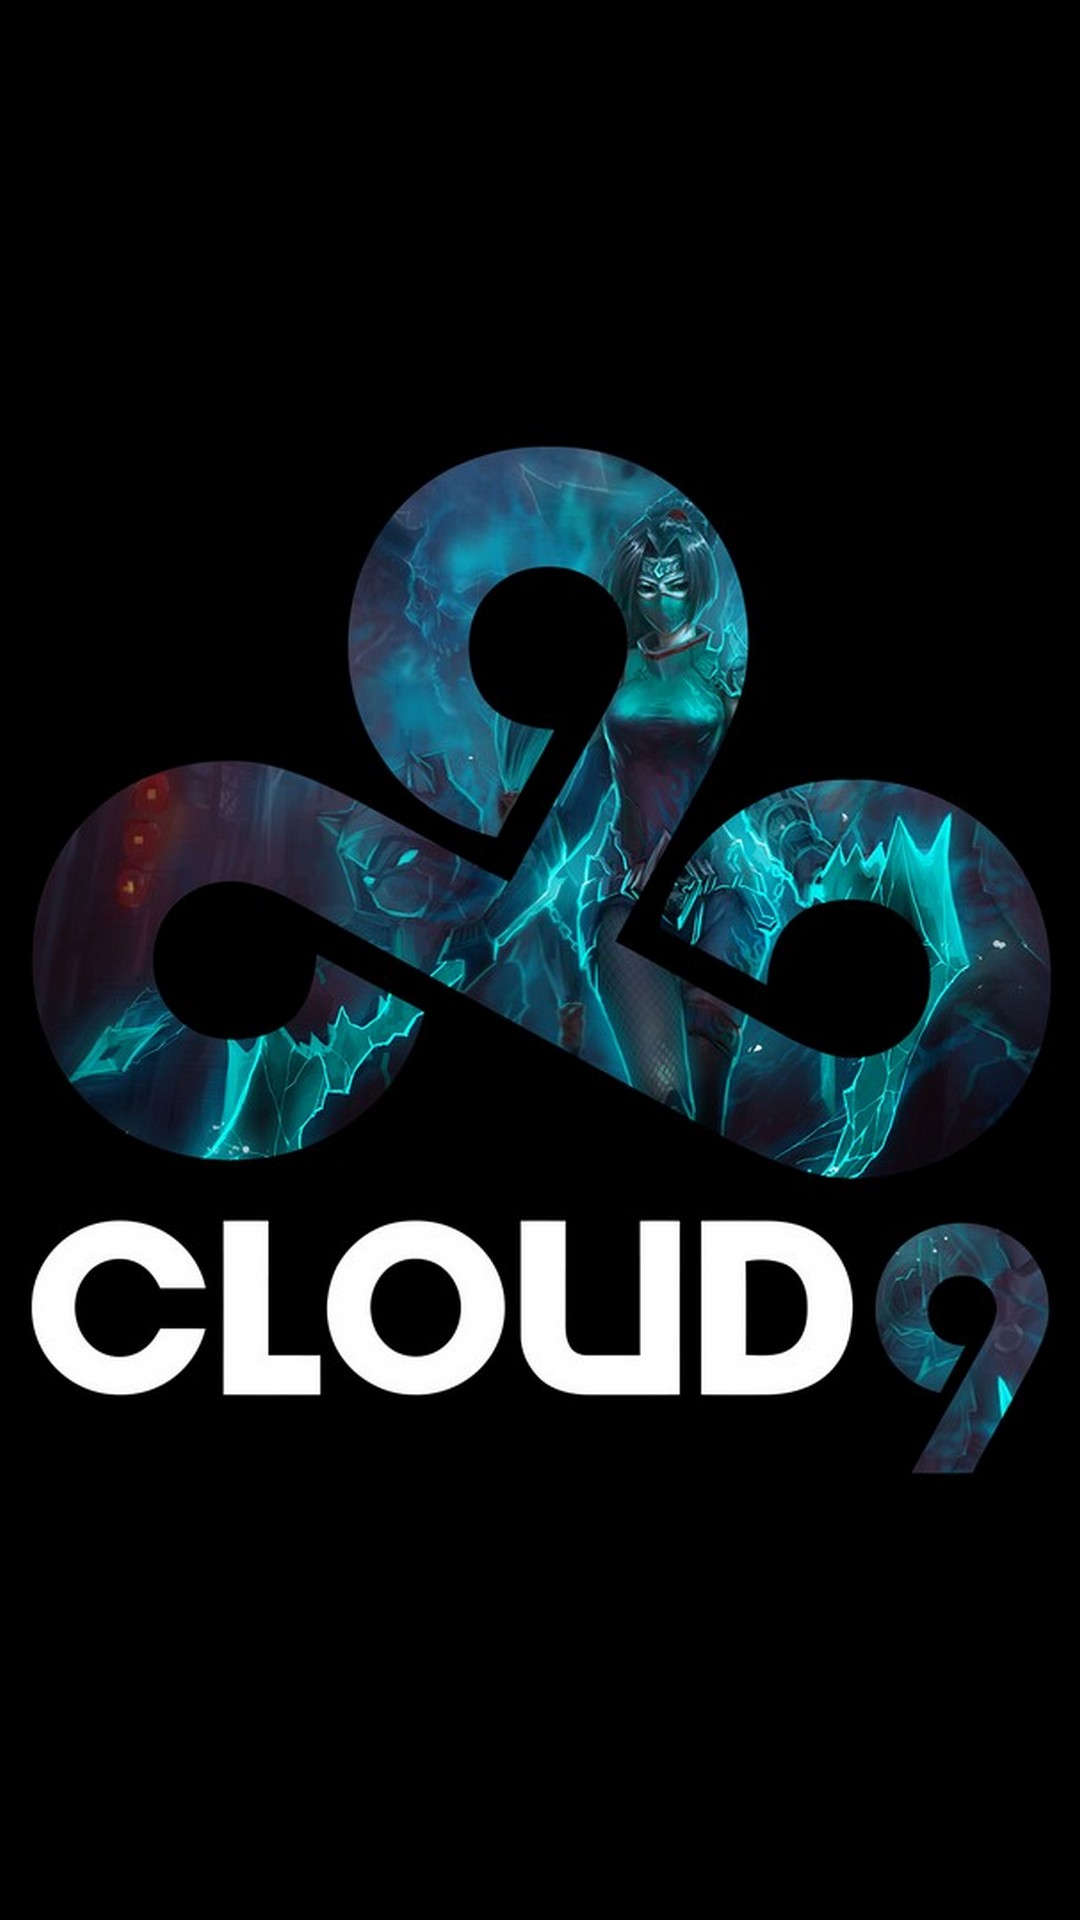 Wallpaper Cloud 9 Android with HD resolution 1080x1920